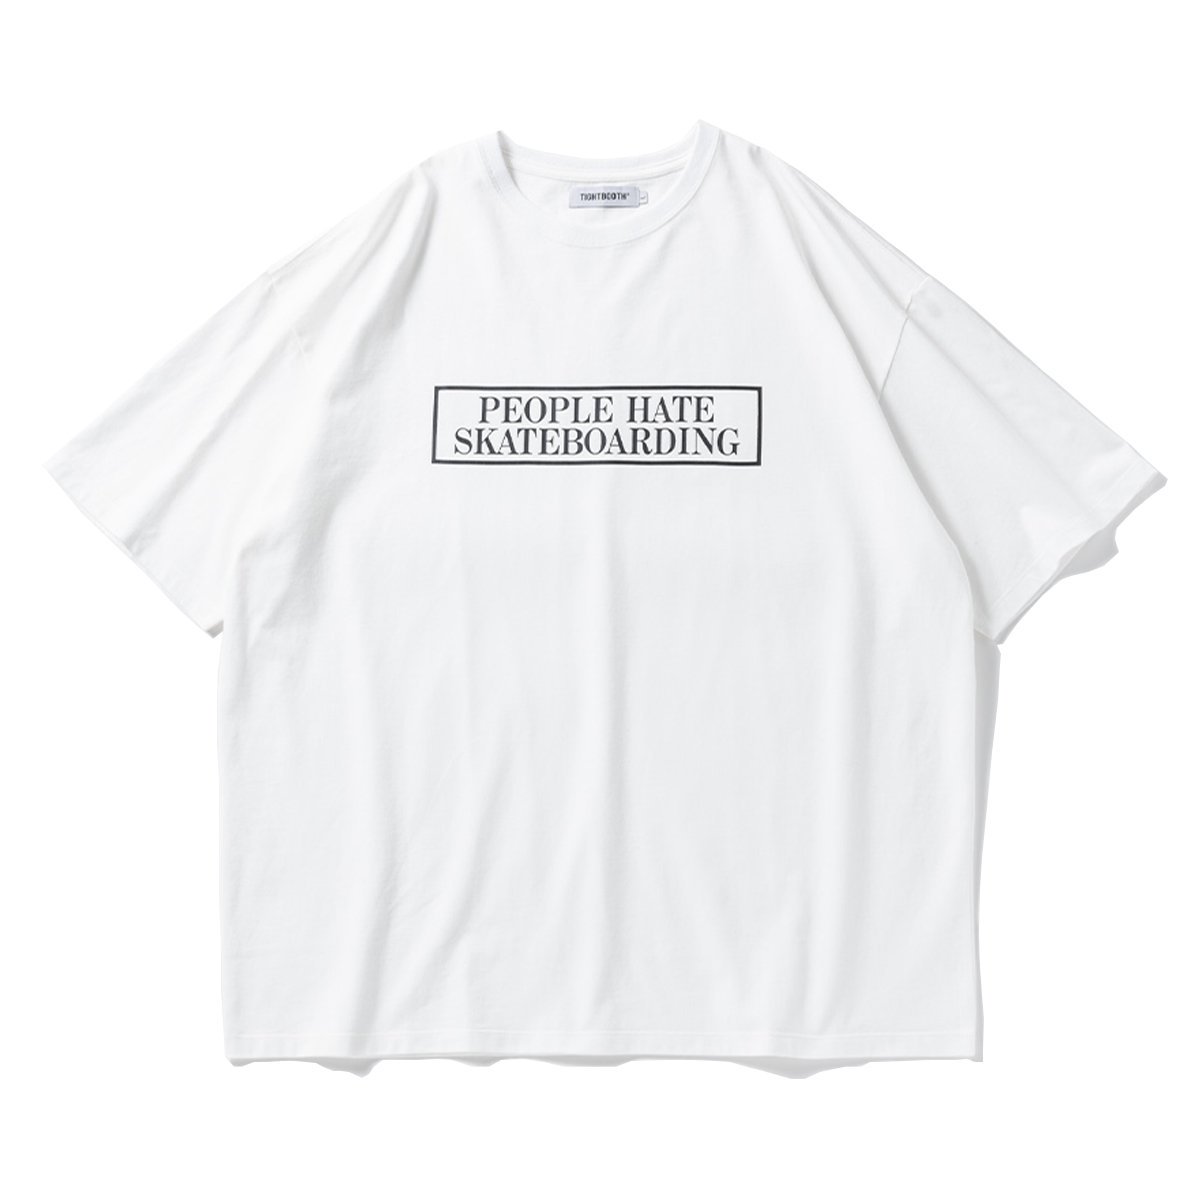 <img class='new_mark_img1' src='https://img.shop-pro.jp/img/new/icons8.gif' style='border:none;display:inline;margin:0px;padding:0px;width:auto;' />TIGHTBOOTHPeople Hate Skate T-Shirt (White)
                          </a>
            <span class=